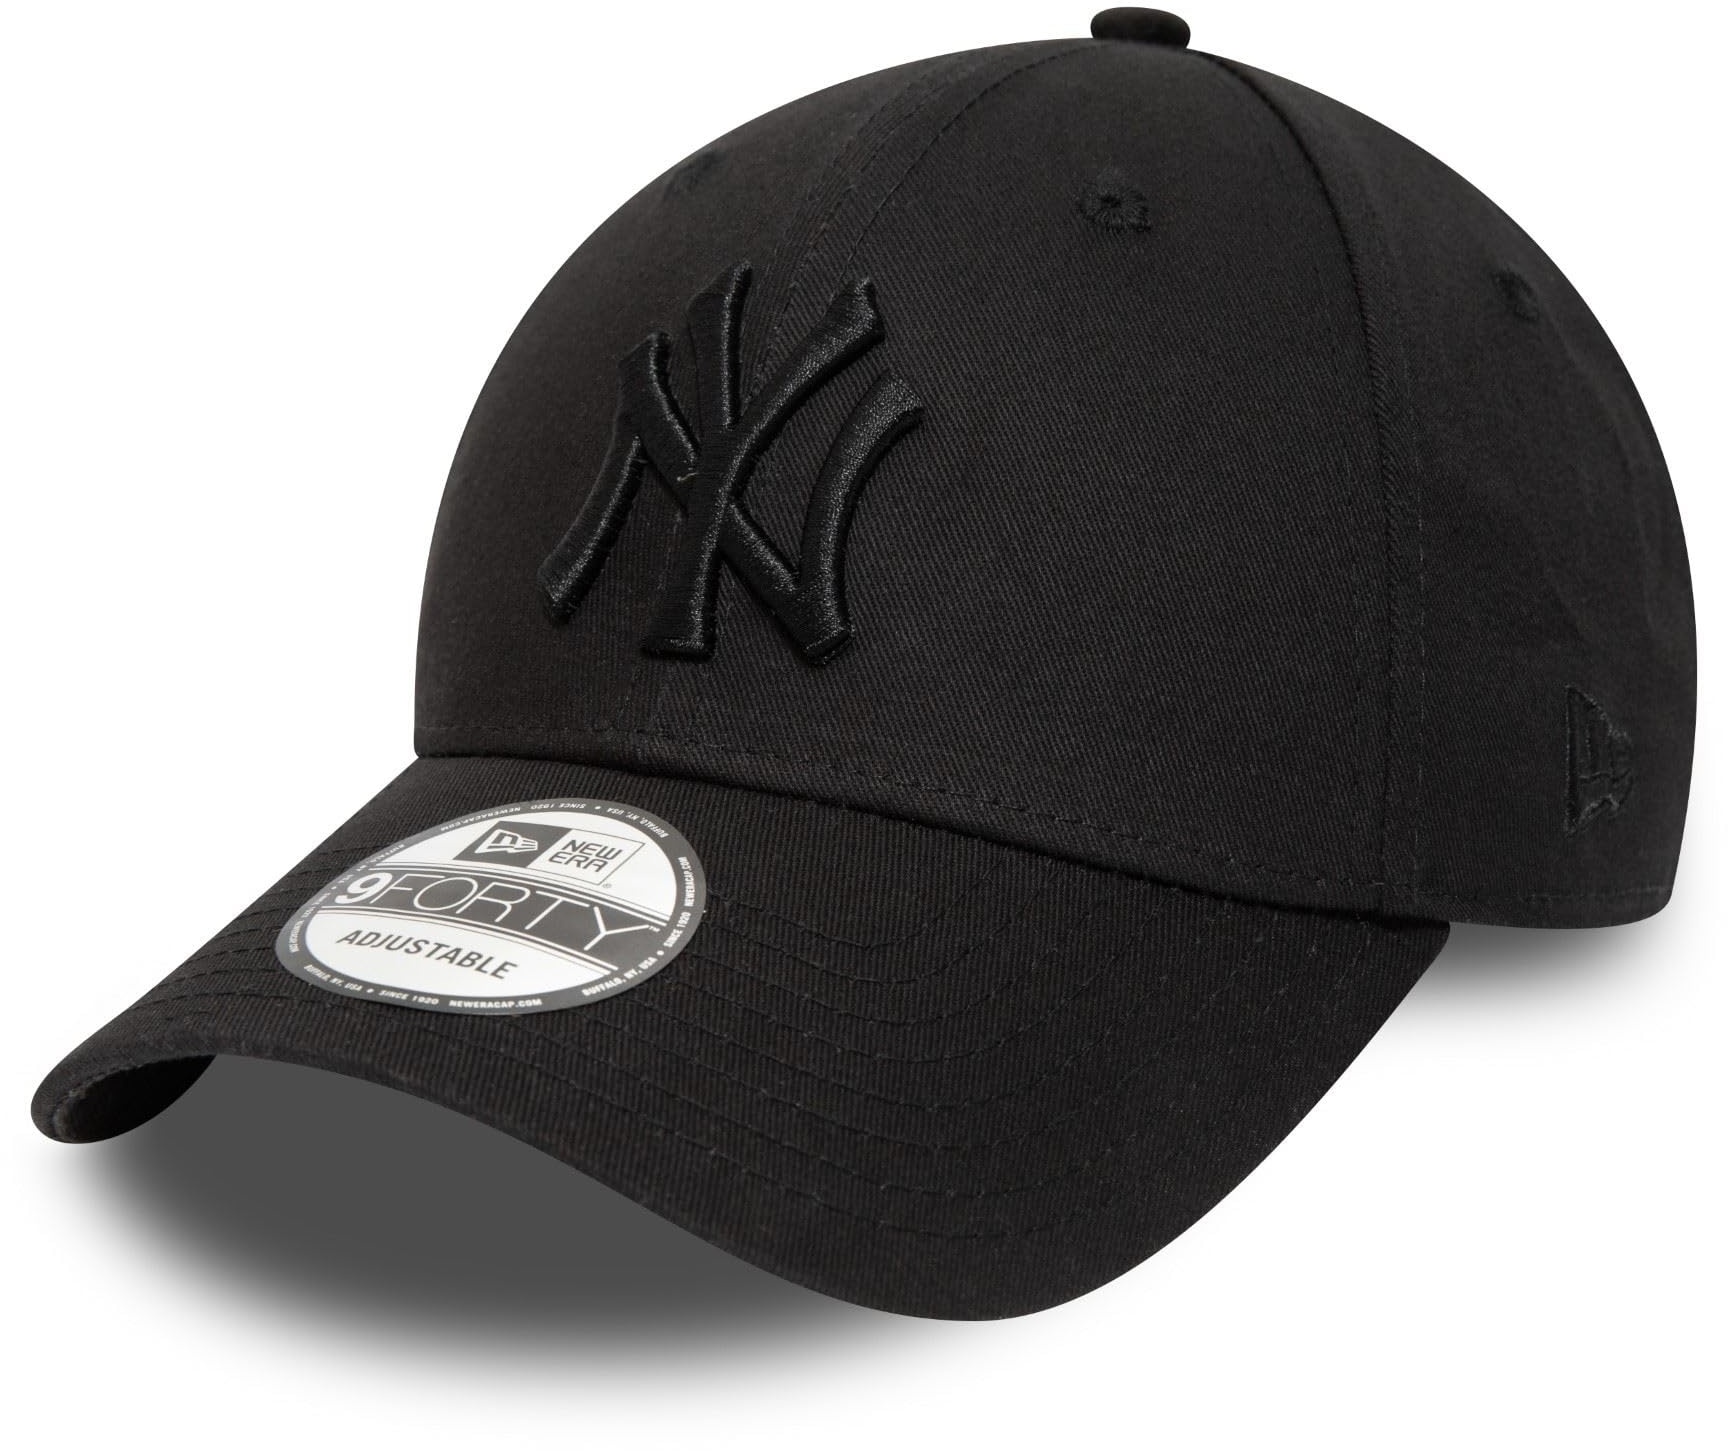 New Era New York Yankees MLB League Essential Black on Black 9Forty Cap - One-Size